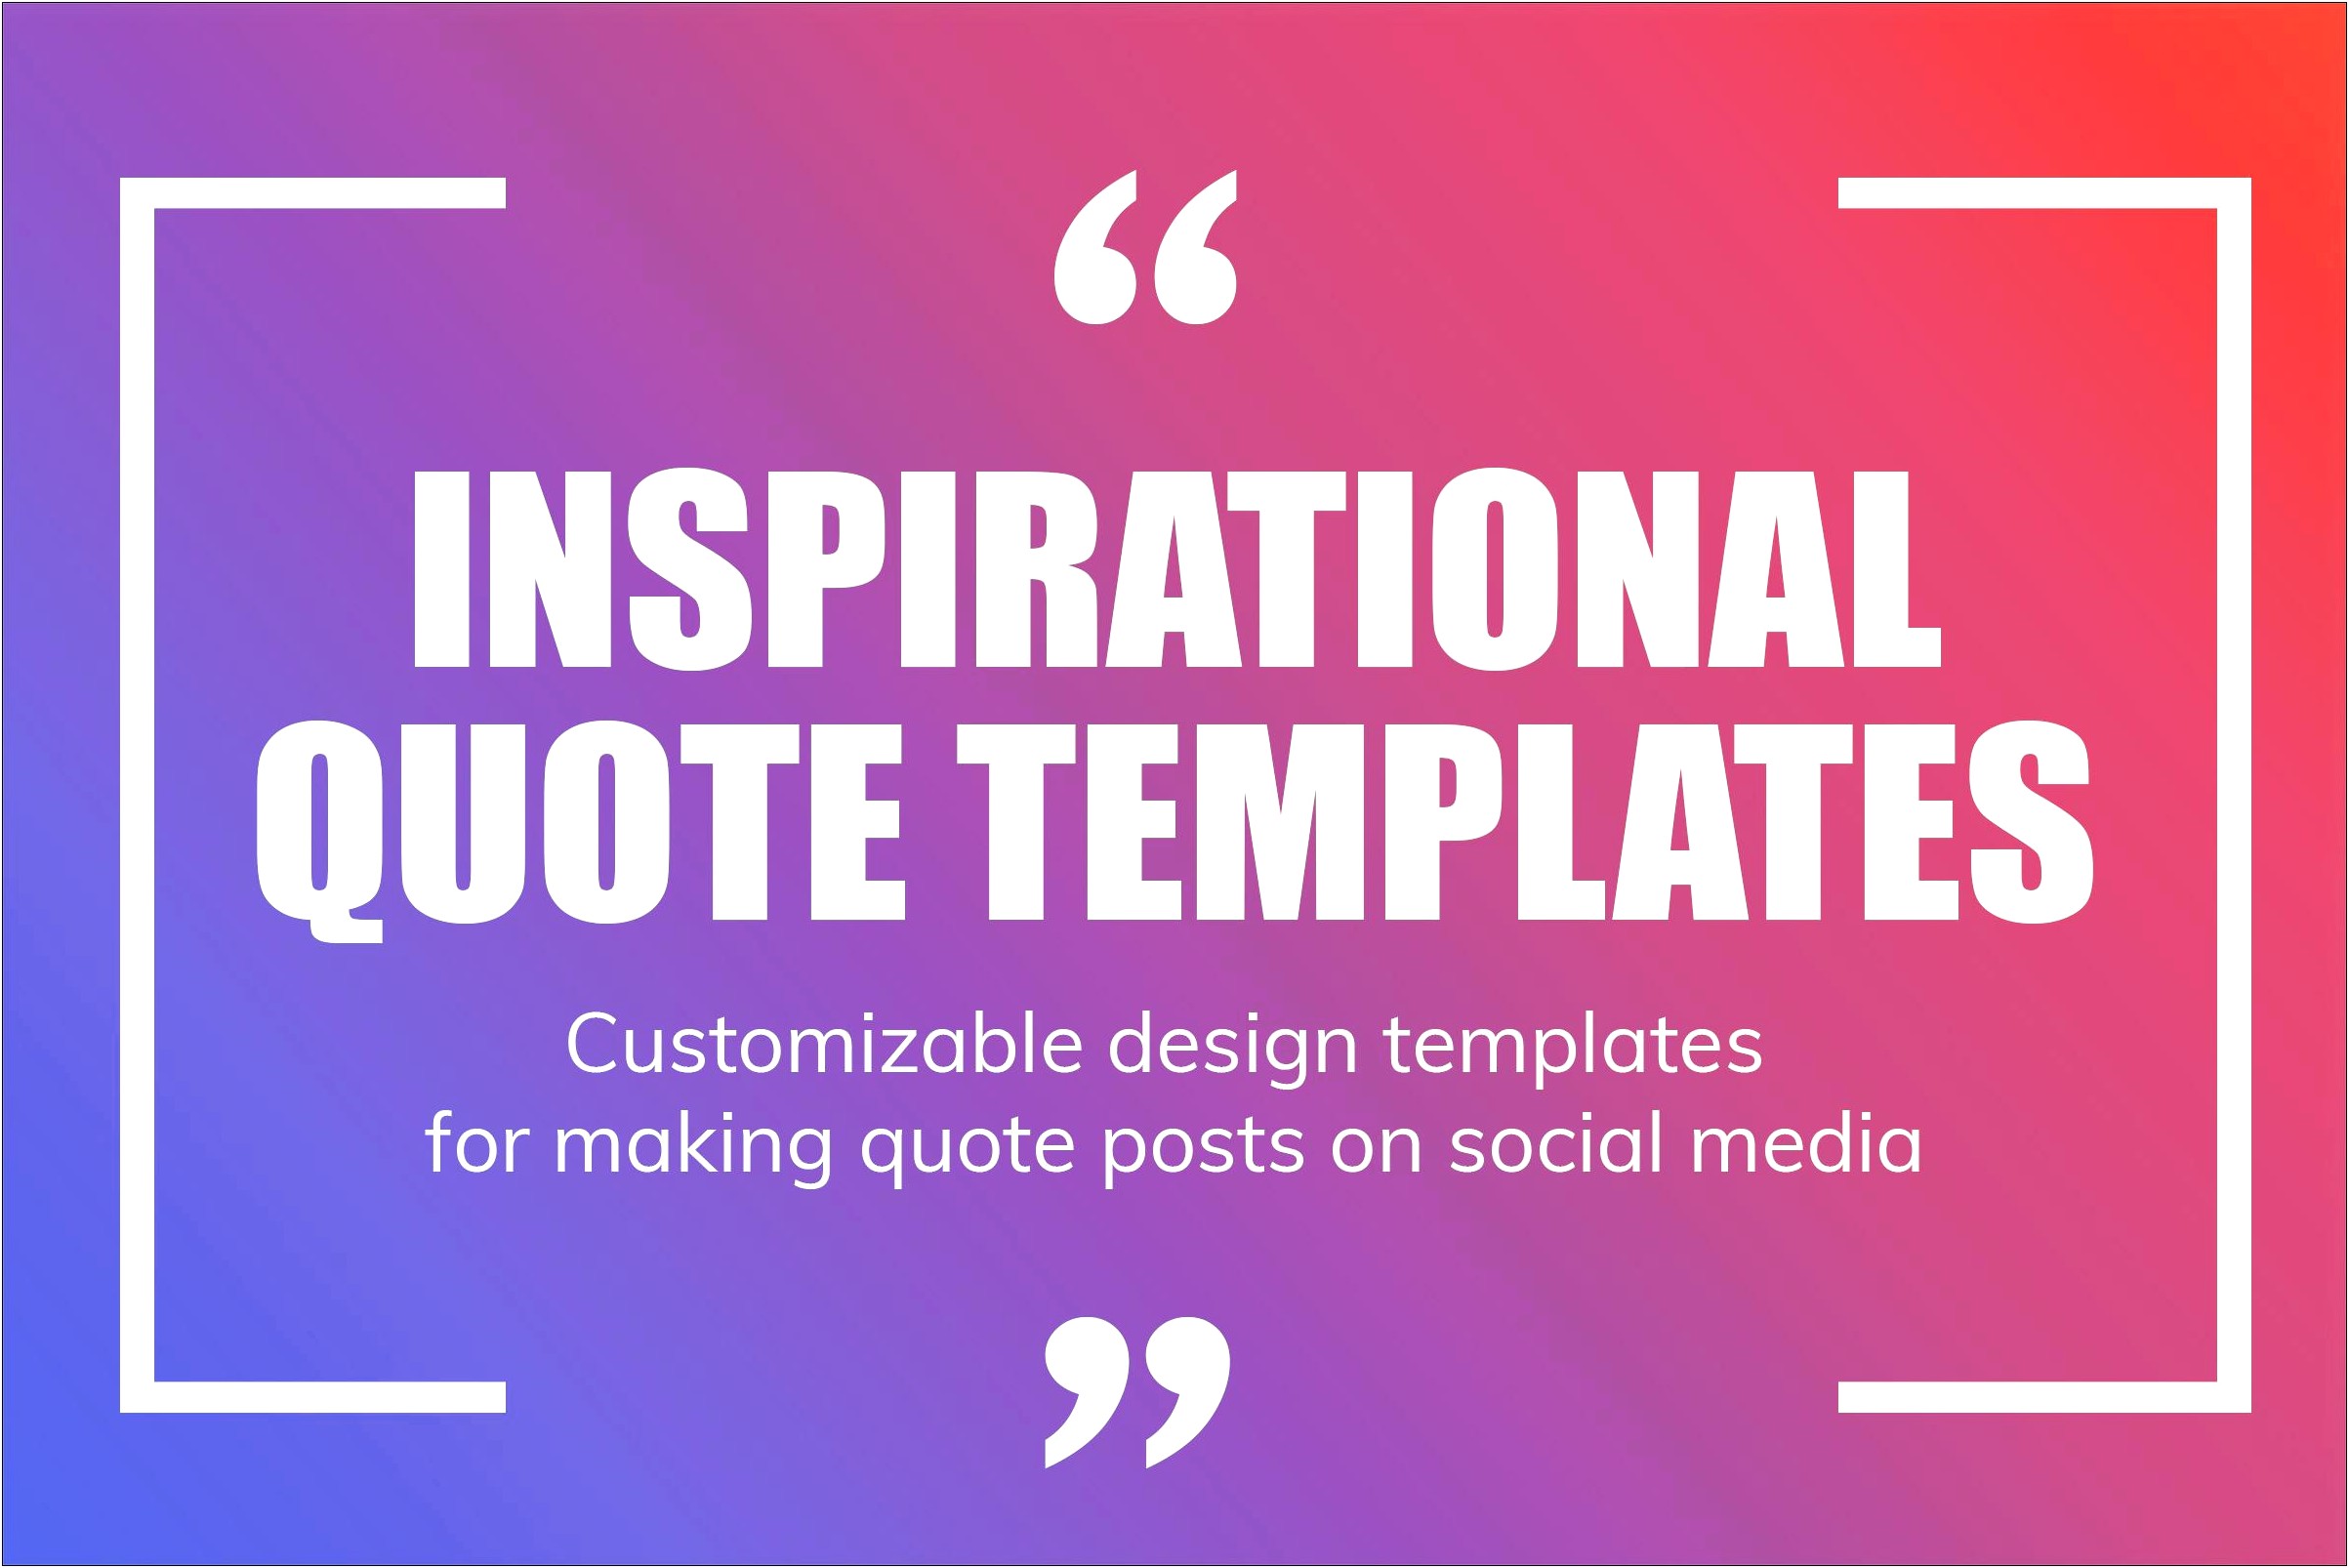 10 Marketing Templates For Inspiration Word